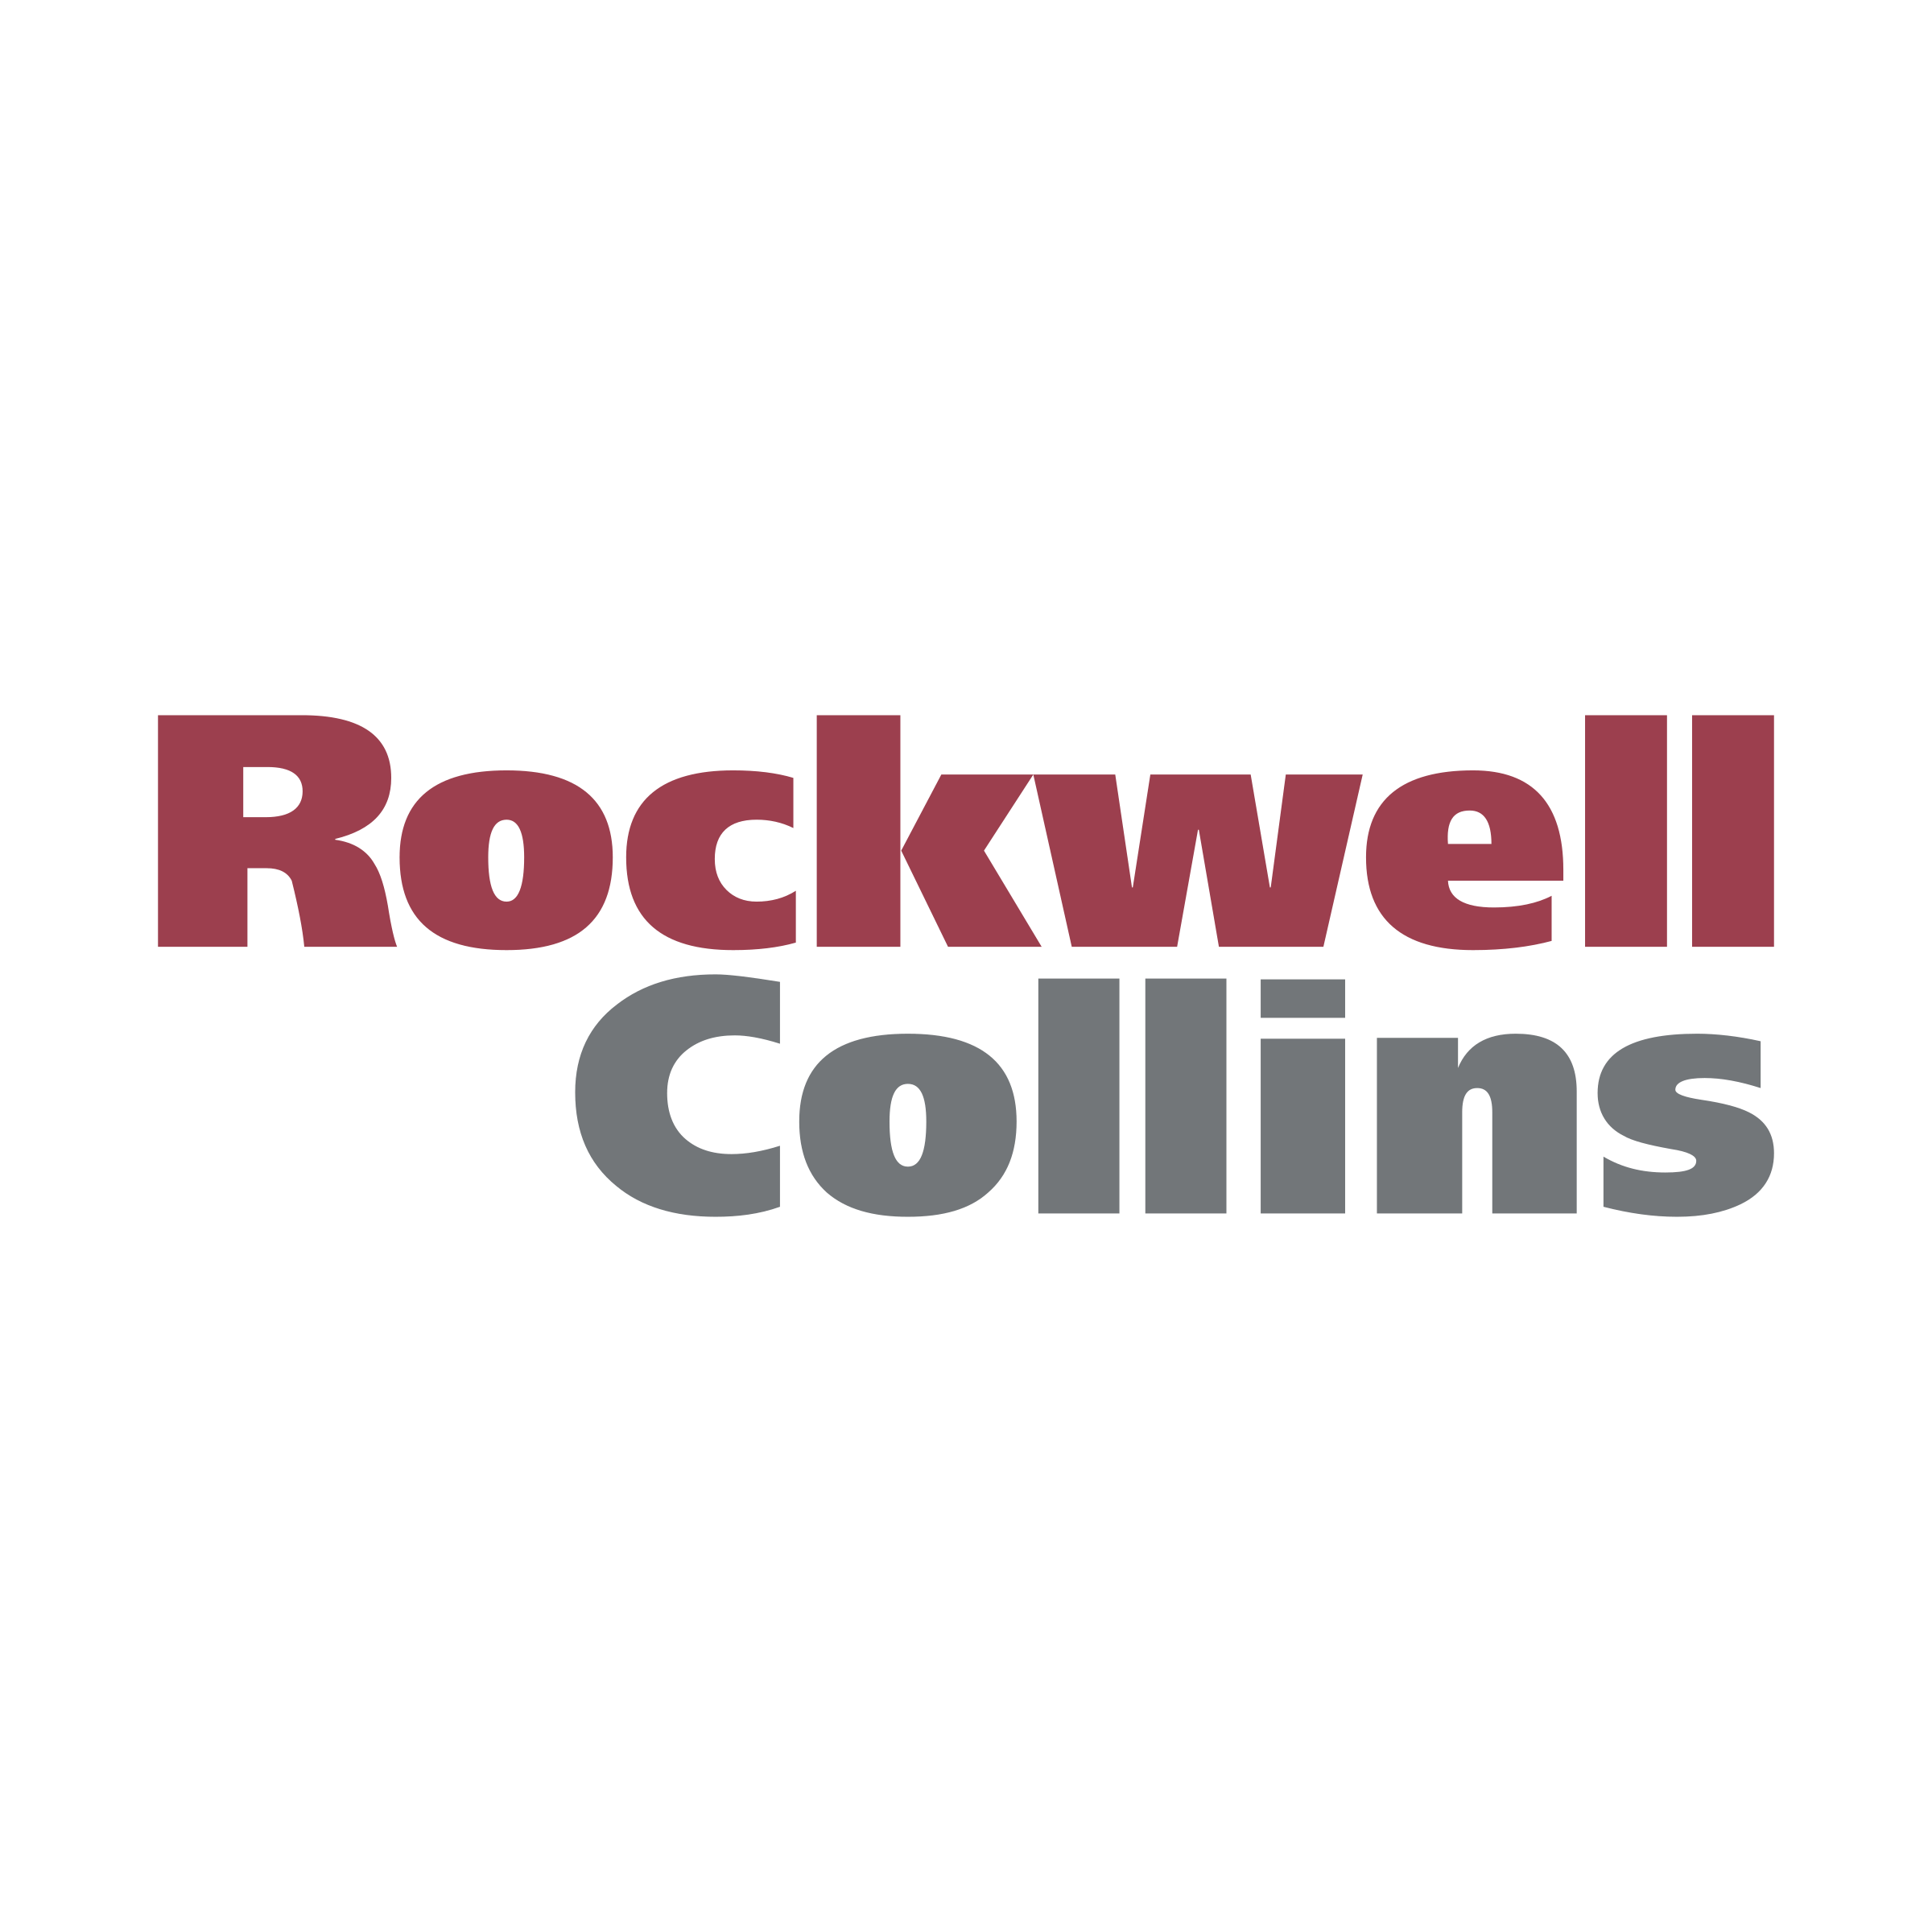 The Collins Logo - Rockwell Collins Logo PNG Transparent & SVG Vector - Freebie Supply